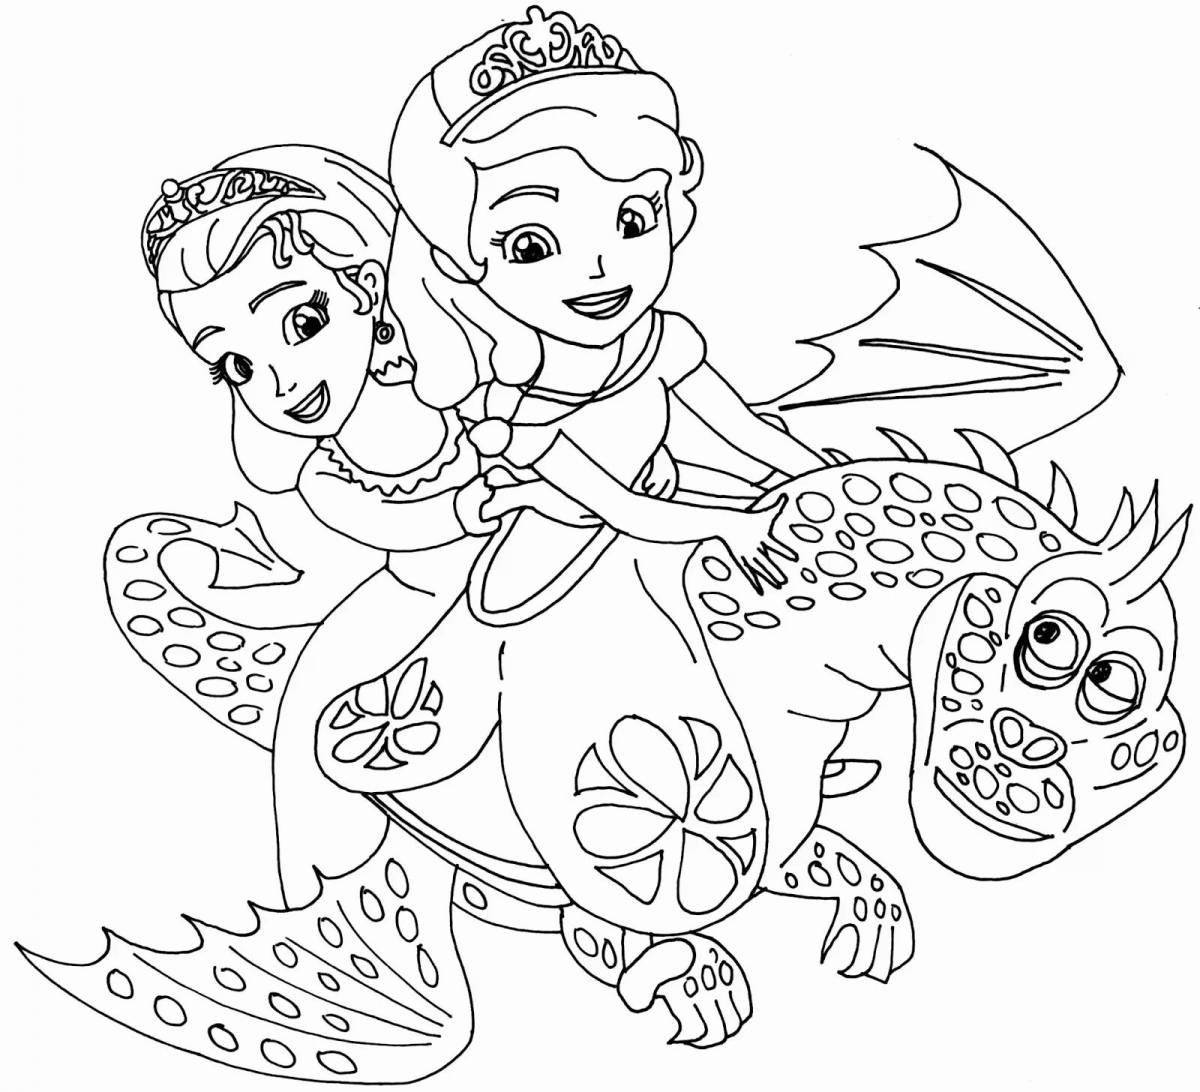 Stylish princesses are preparing coloring pages